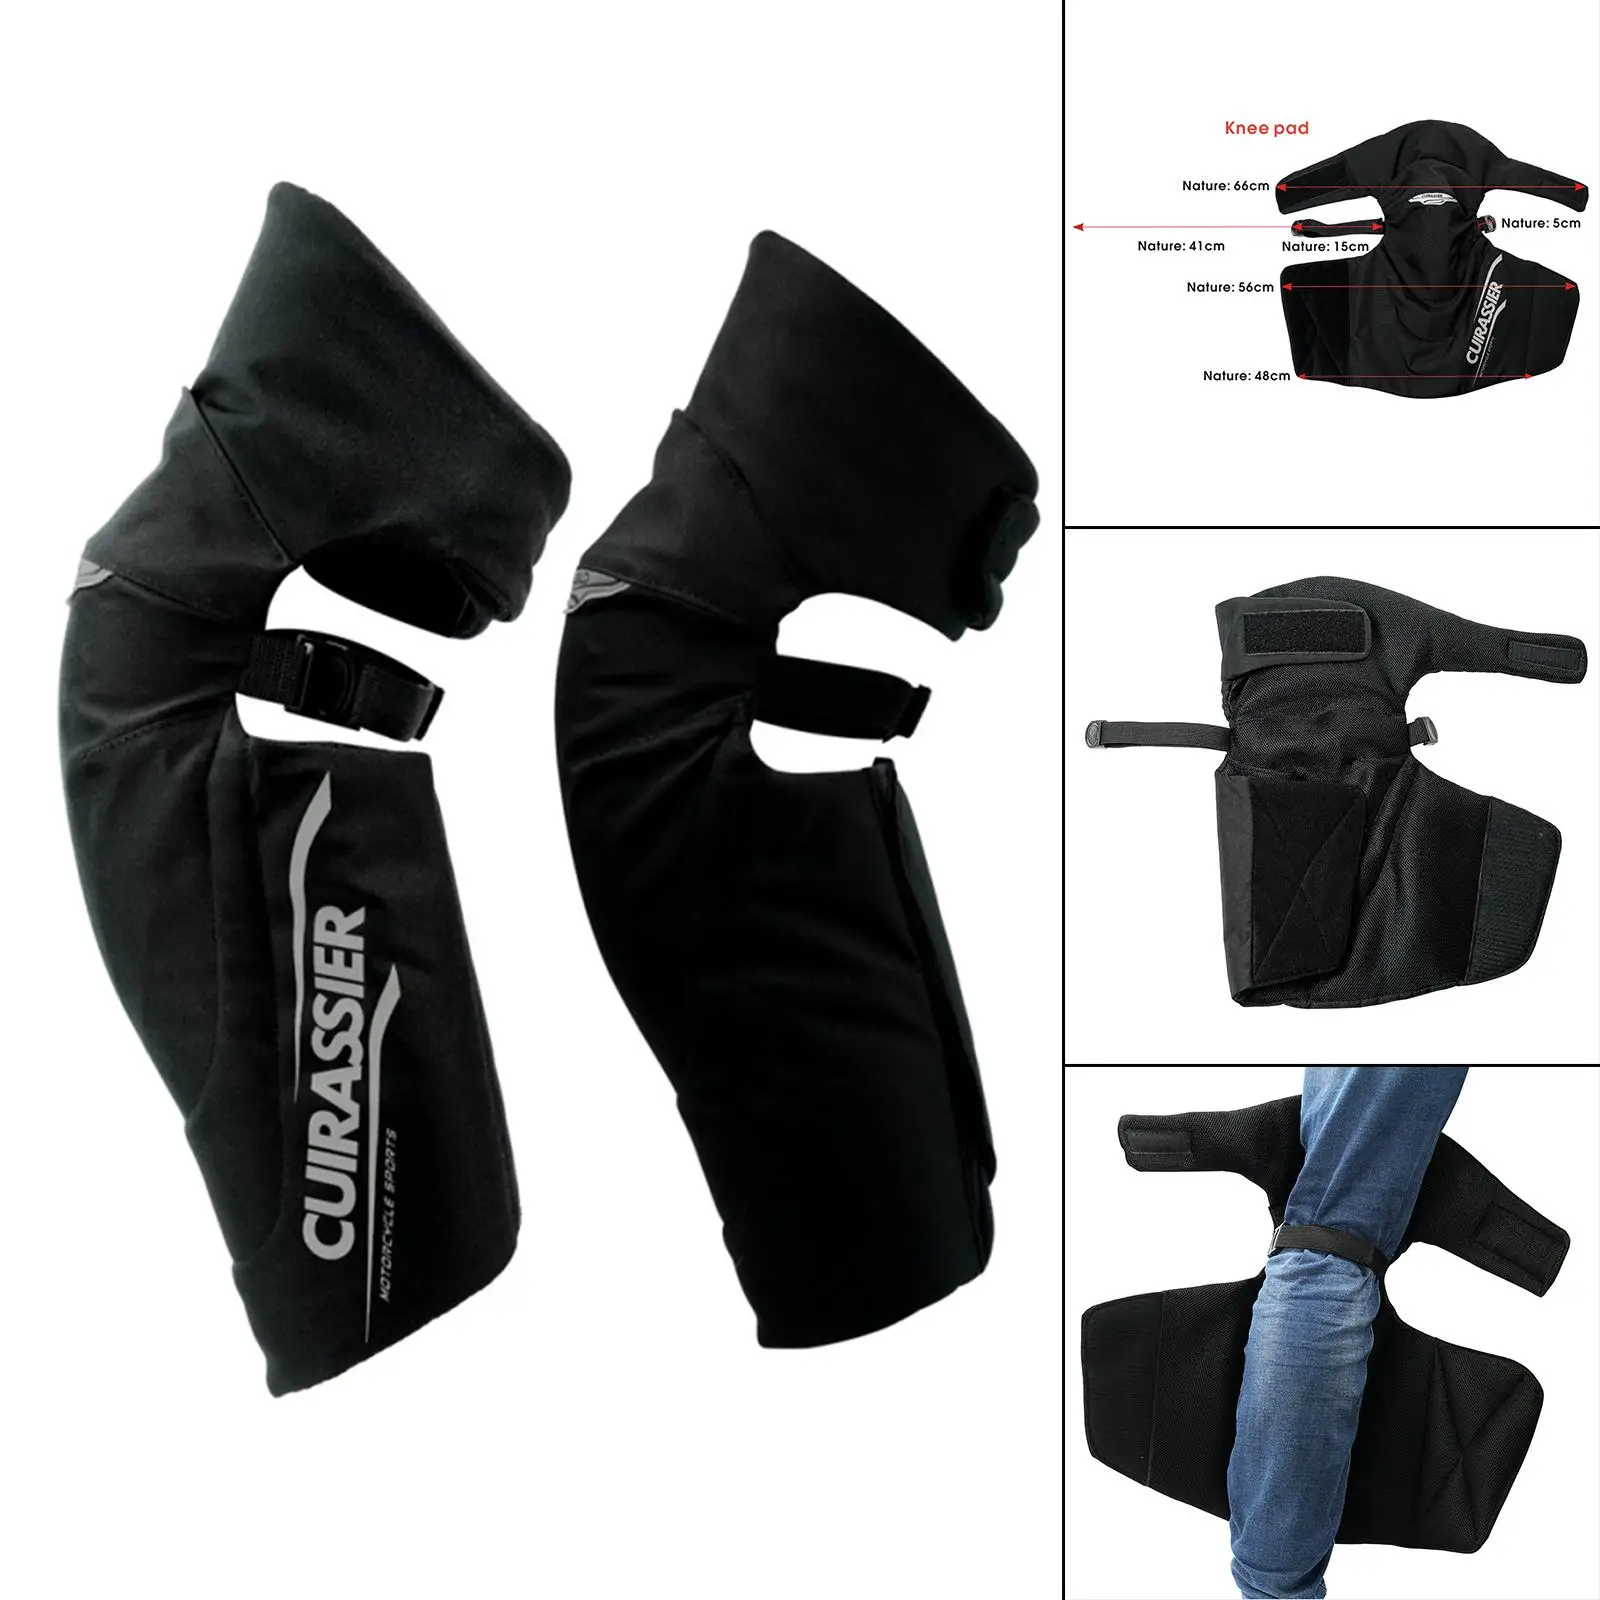 Motorcycle Knee Pads Knee Guards Cotton Padded Oxford Cloth Adjustable Strap Leggings Covers Protector Fits for Motocross Riding